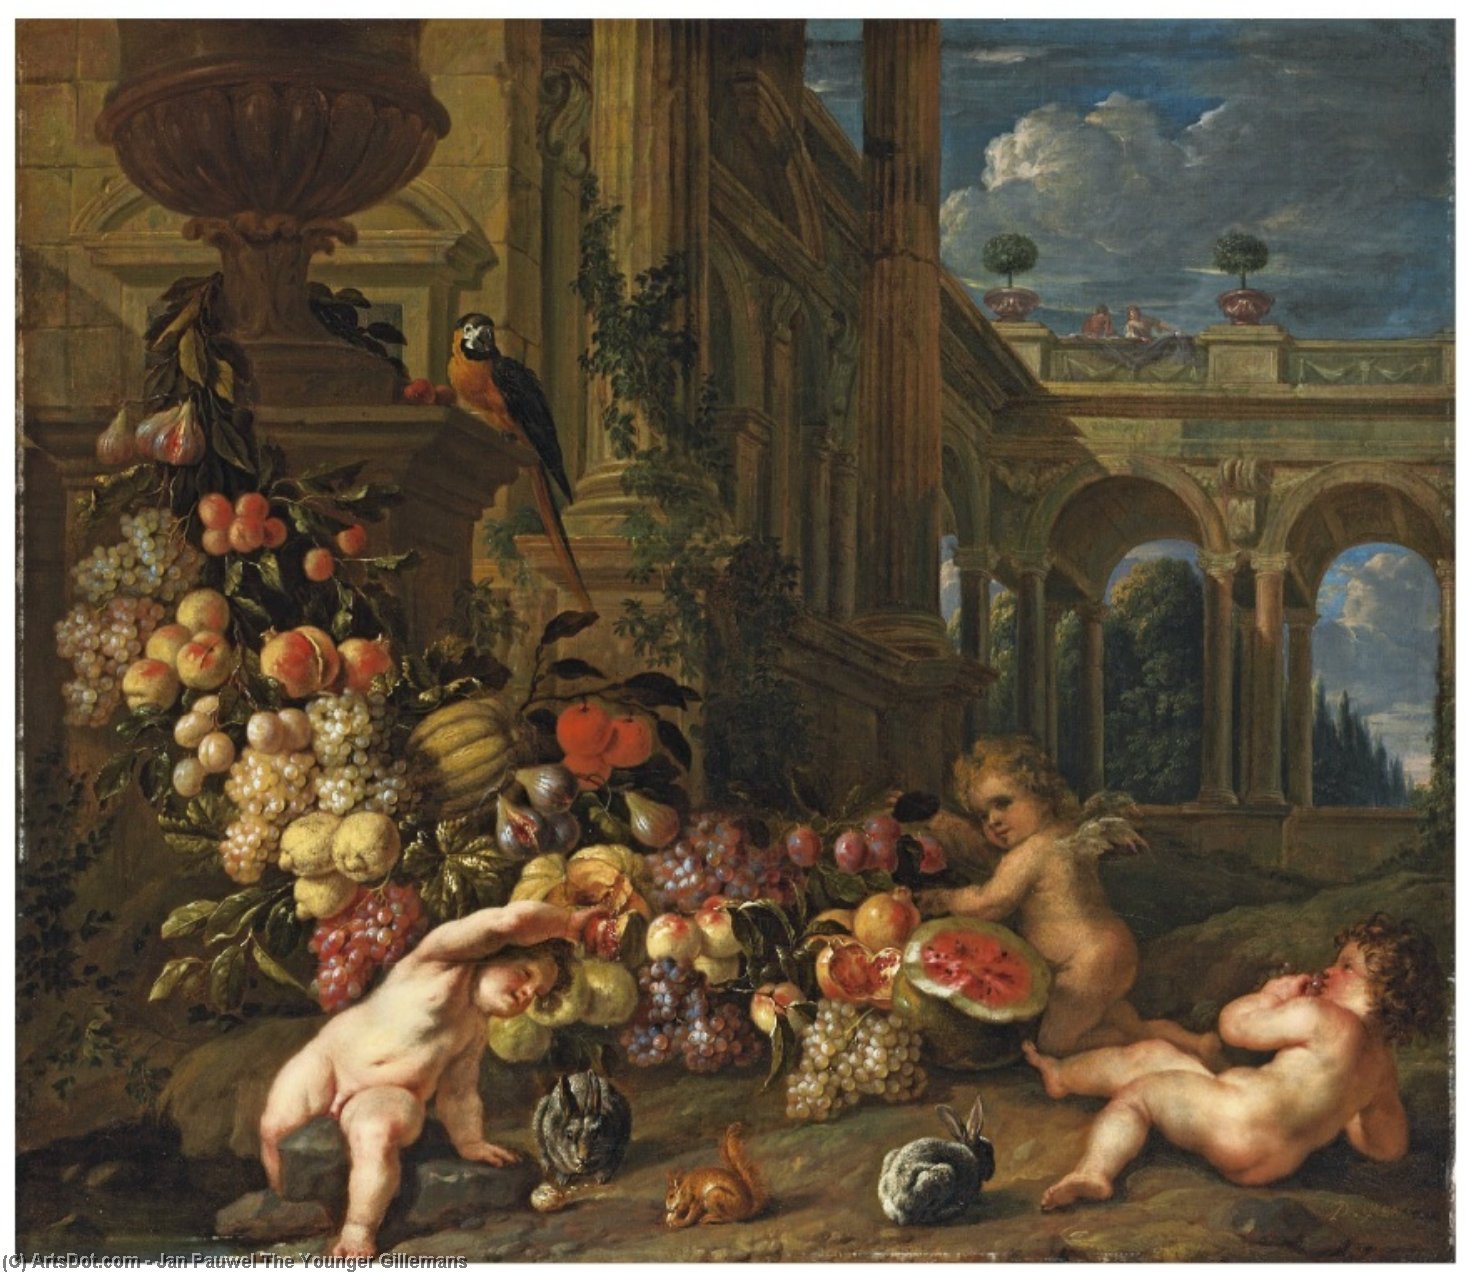 Wikioo.org - สารานุกรมวิจิตรศิลป์ - จิตรกรรม Jan Pauwel The Younger Gillemans - An architectural capriccio with putti around a swag of fruit, with a parrot, squirrel and rabbits